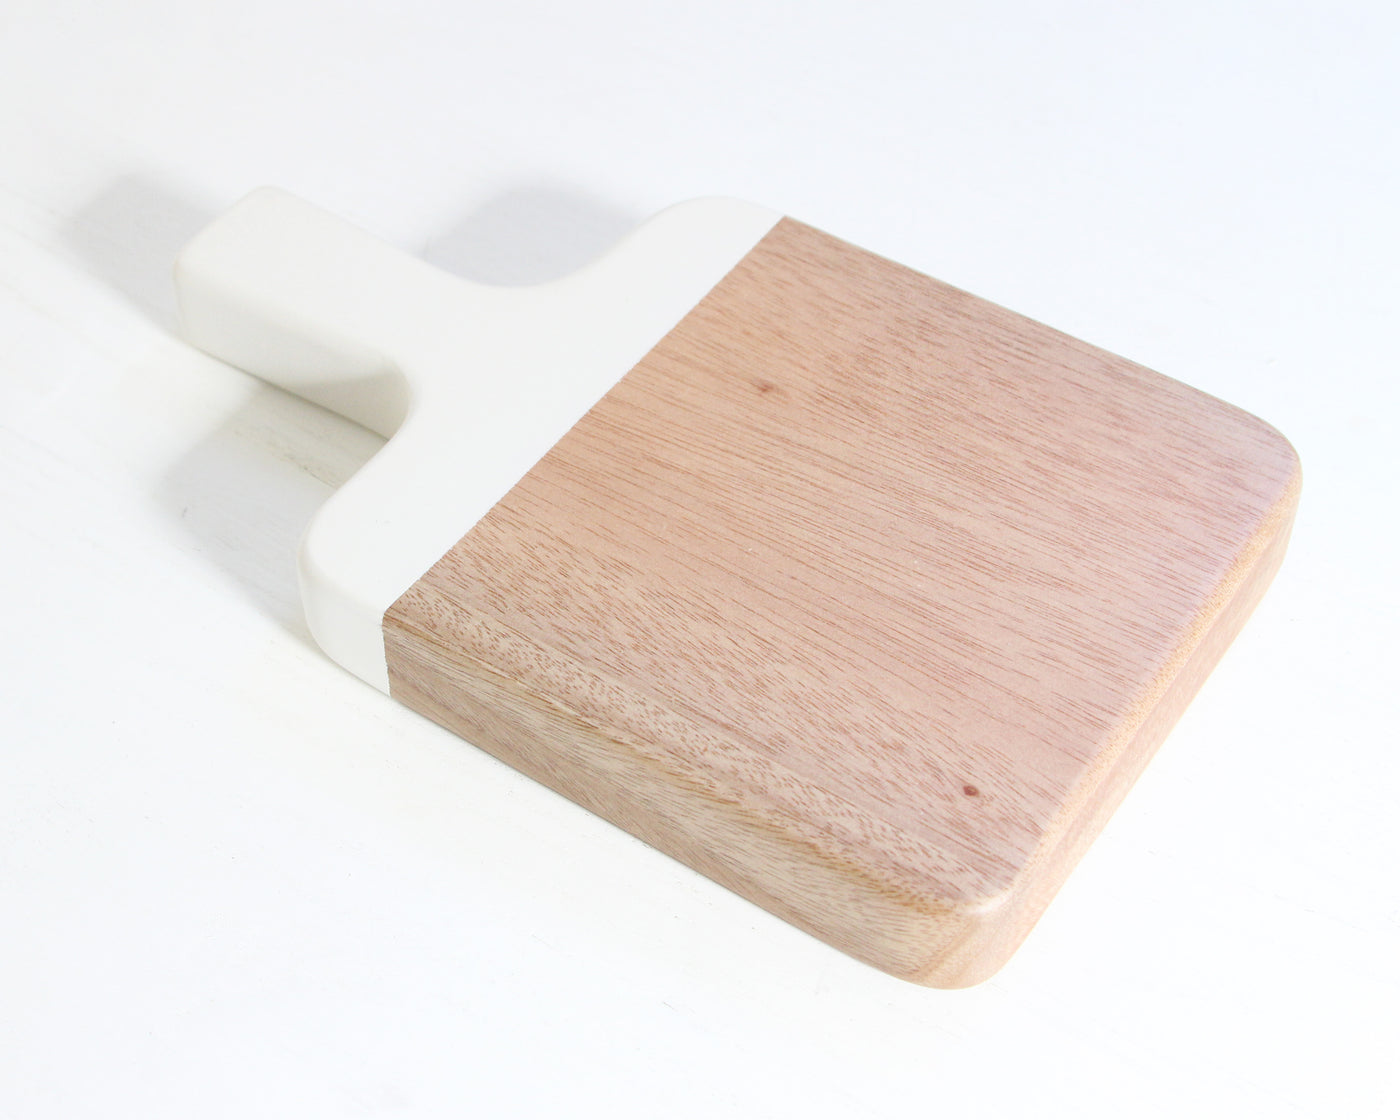 Small Wooden Board with White Handle